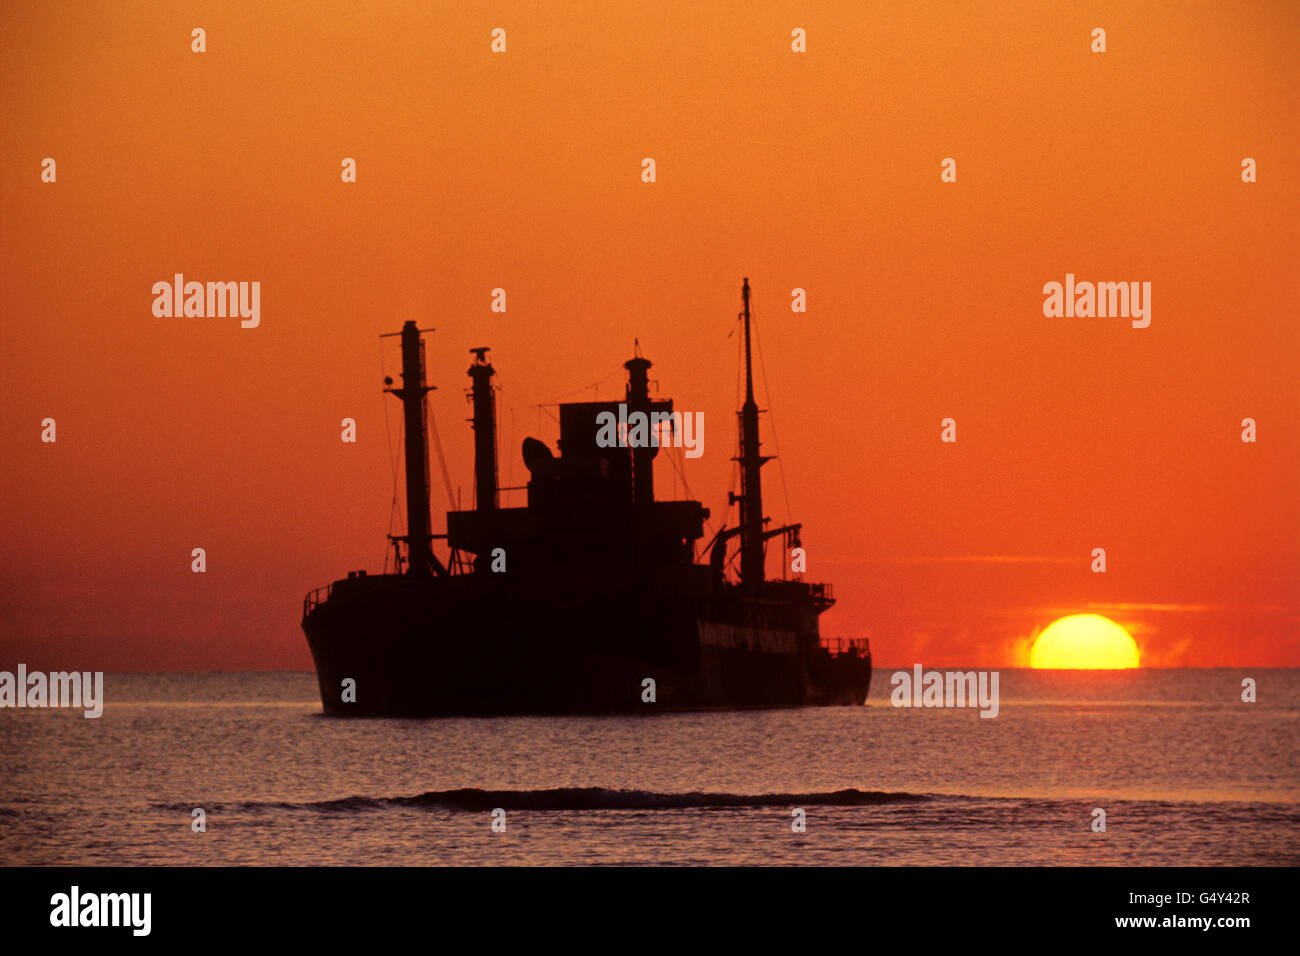 The sun slips below the Mediterranean Sea and silhouettes the SS Dimitrious, grounded near Akritiri, Cyprus, after being on fire. Her crew were rescued by RAF helicopter Stock Photo